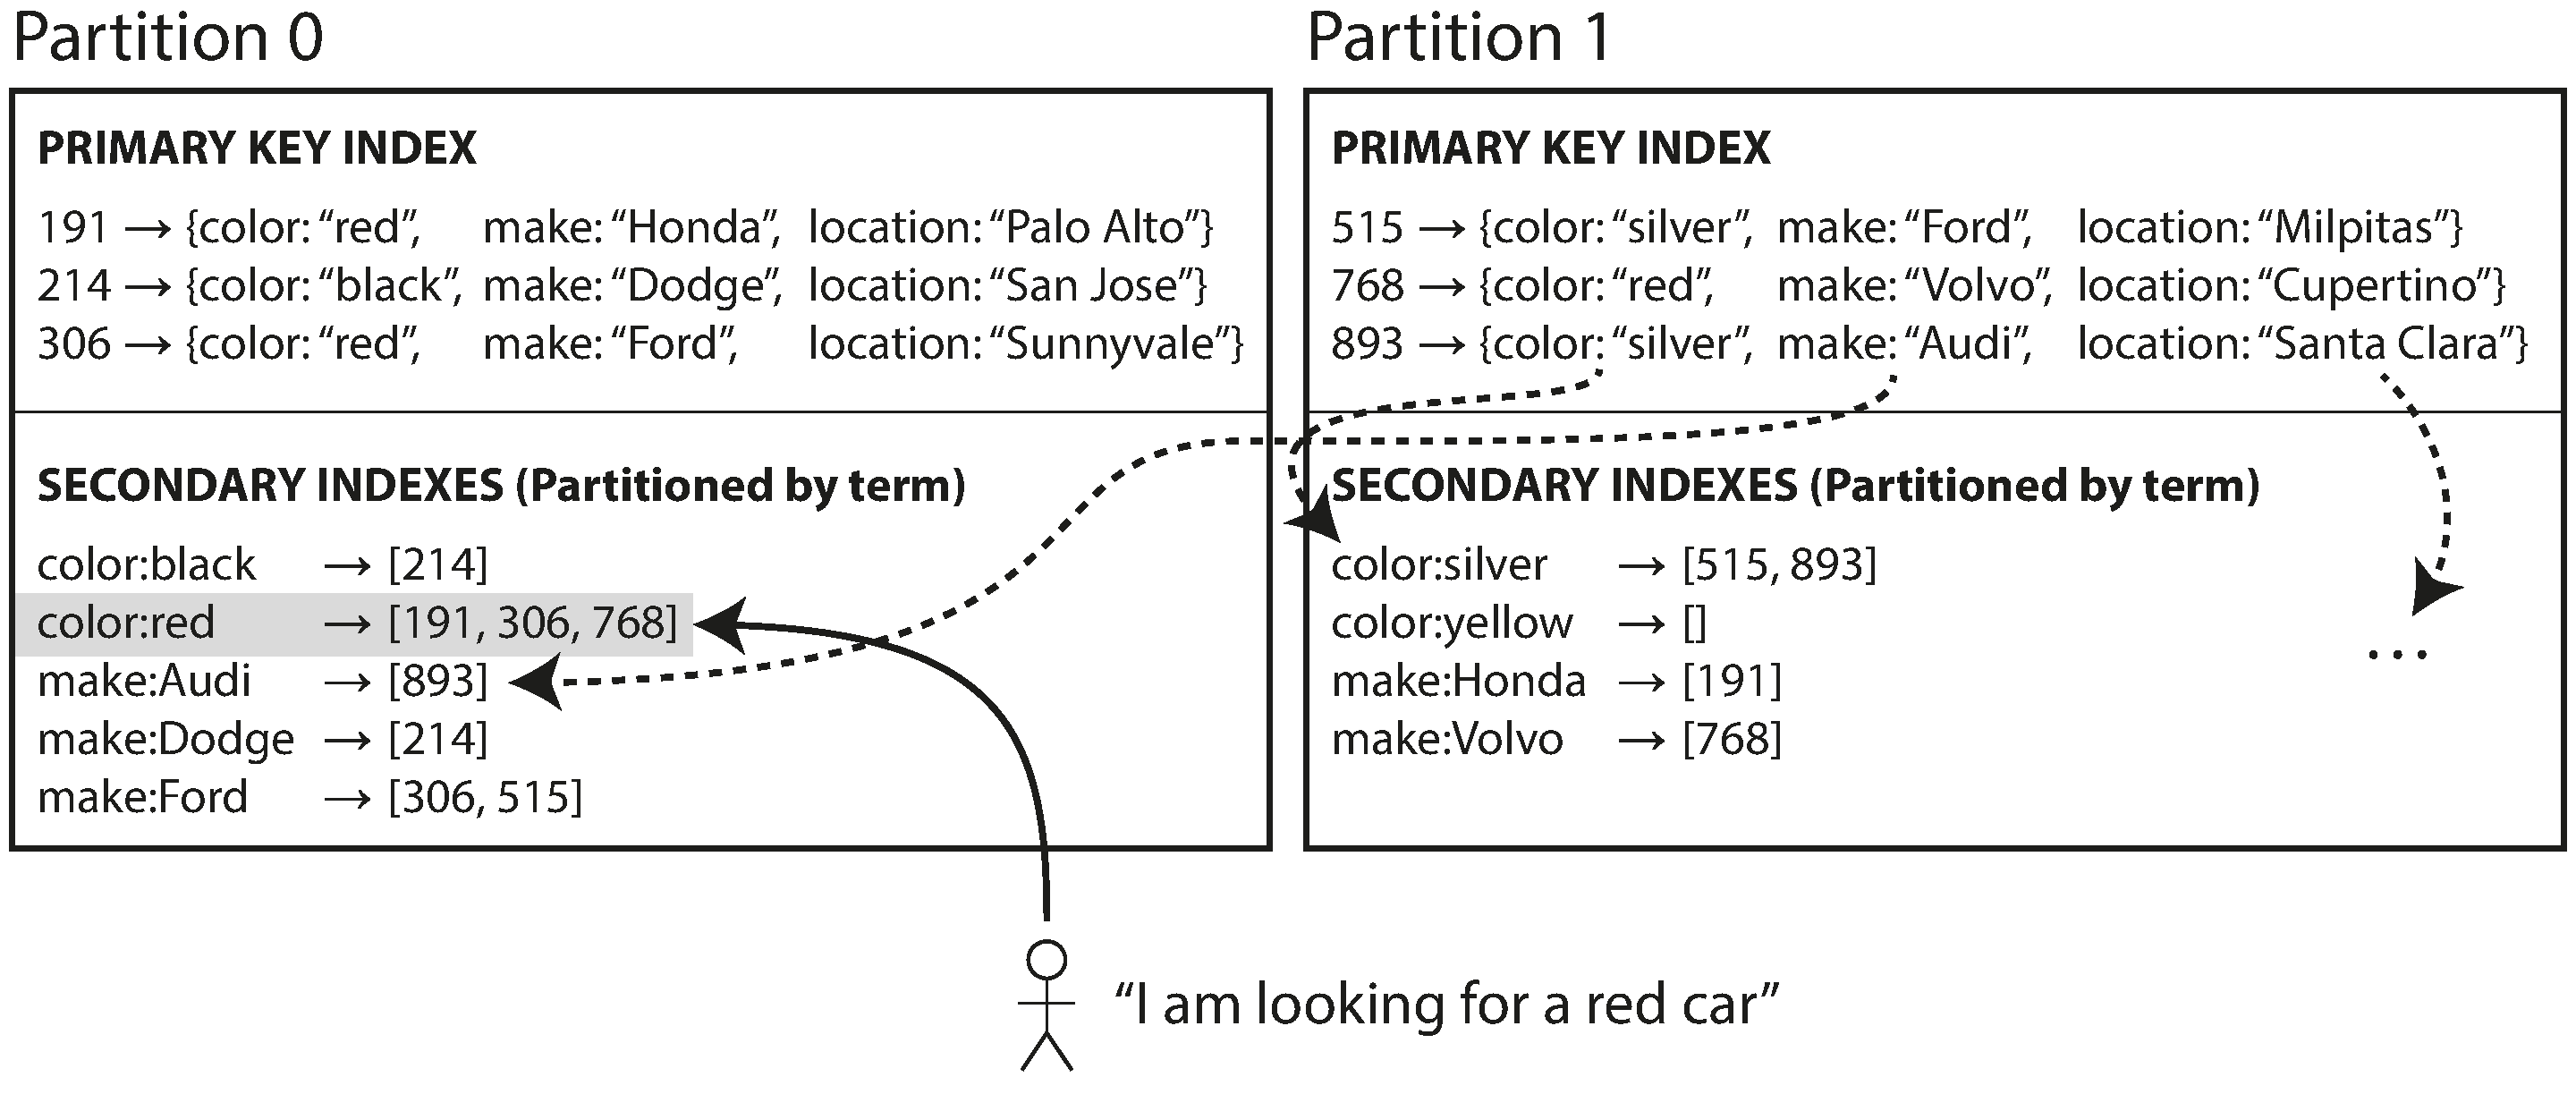 Figure 6-5. Partitioning secondary indexes by term